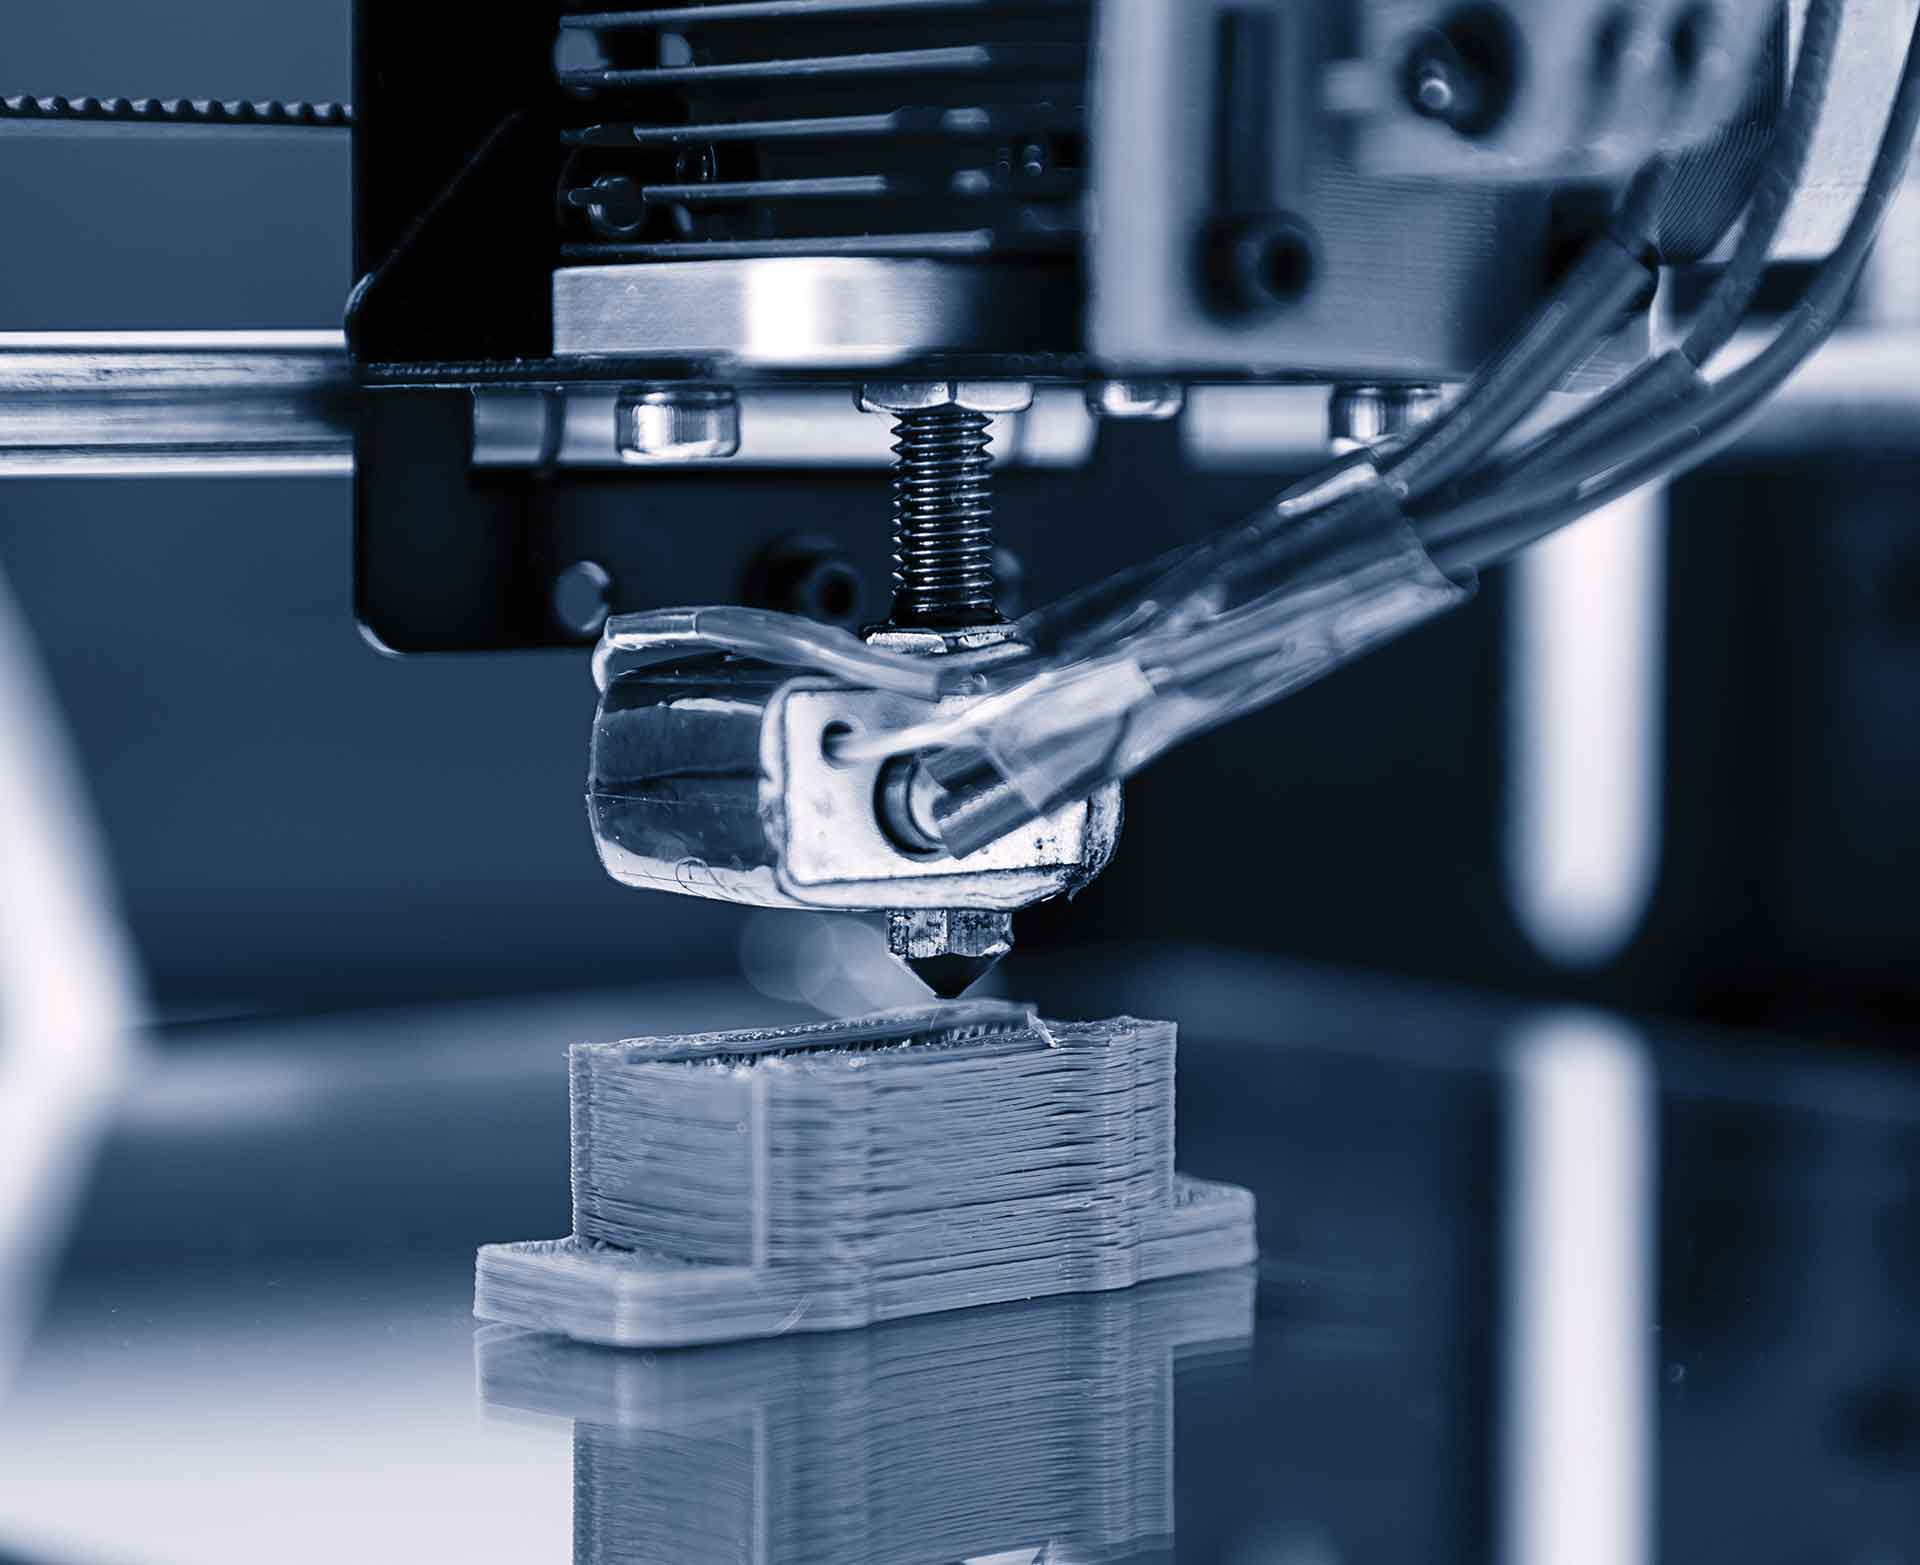 Applications of Additive Manufacturing